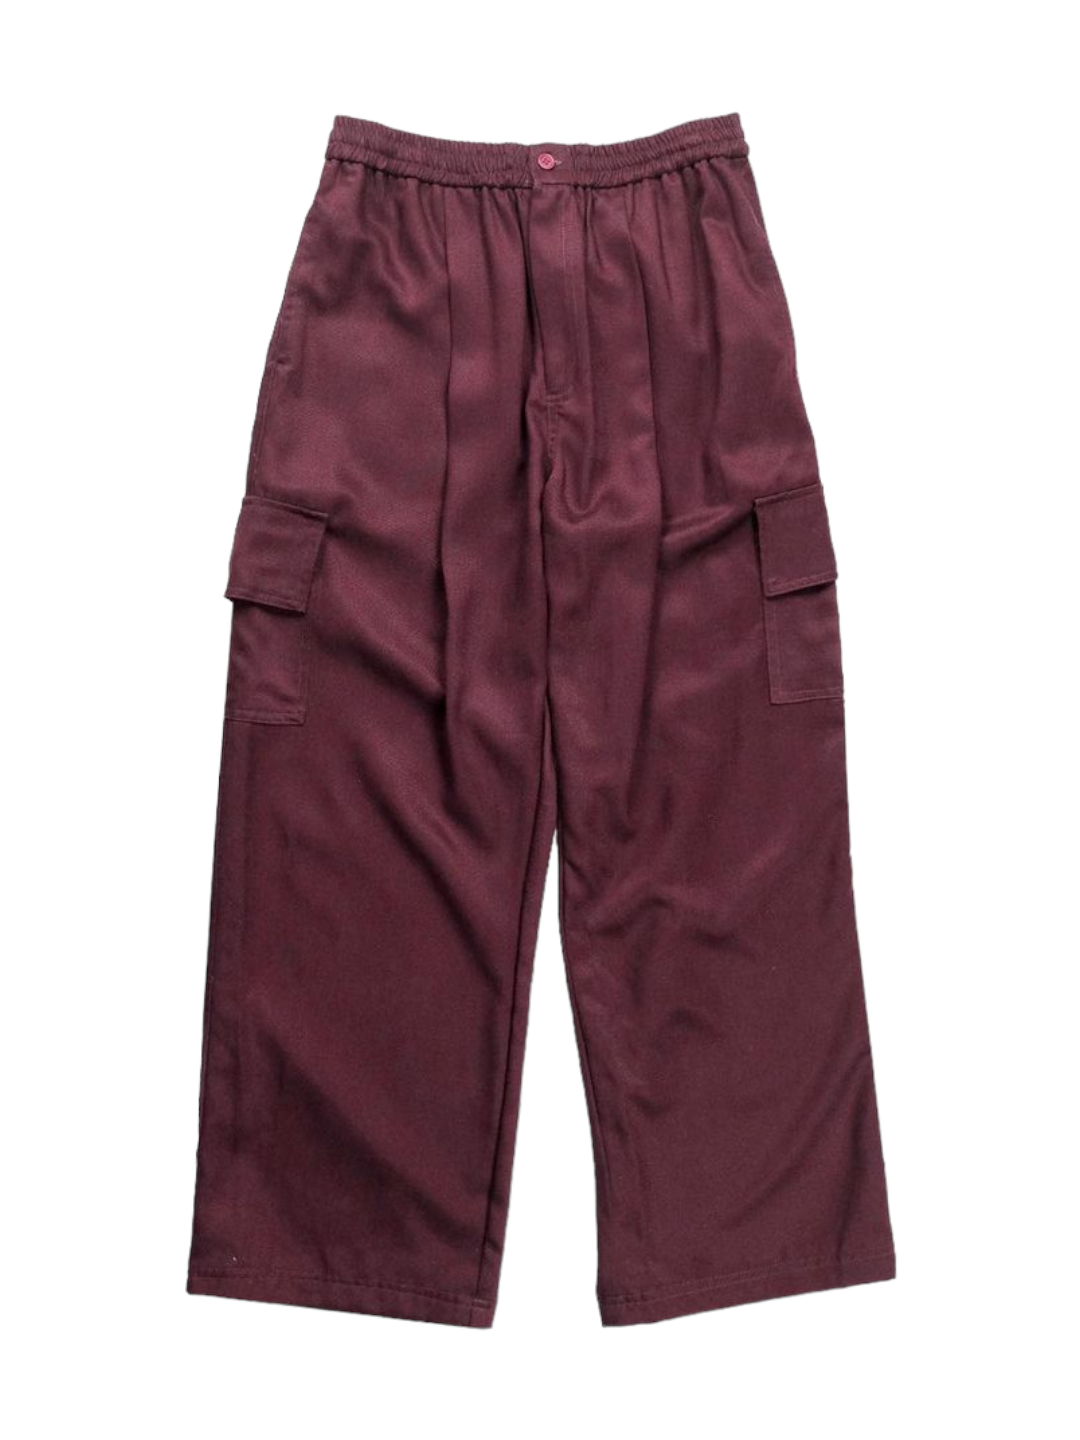 Wide-Cargo Relaxed Pants in Red Wine